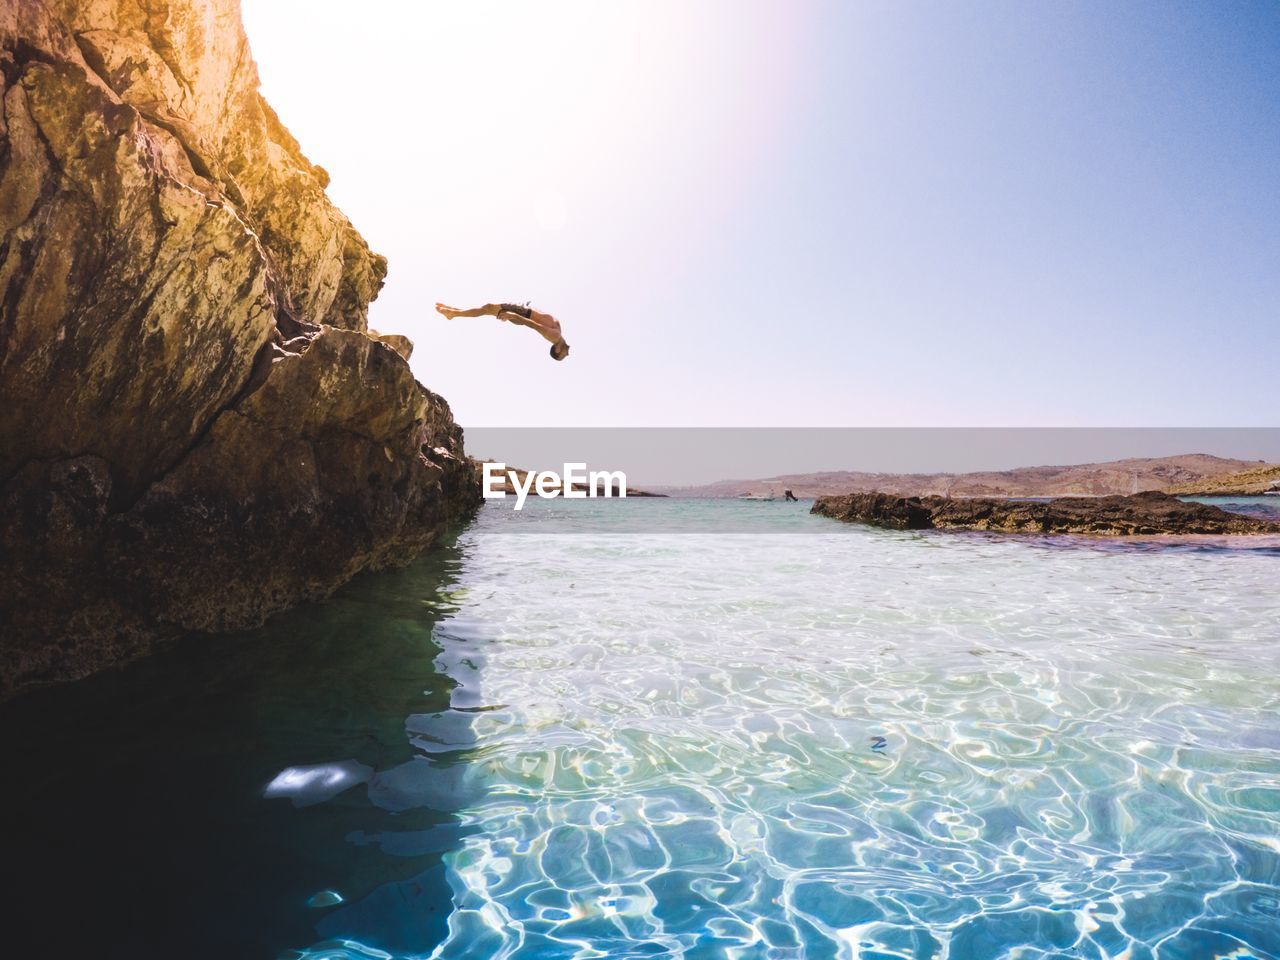 Man diving into sea from cliff against clear sky